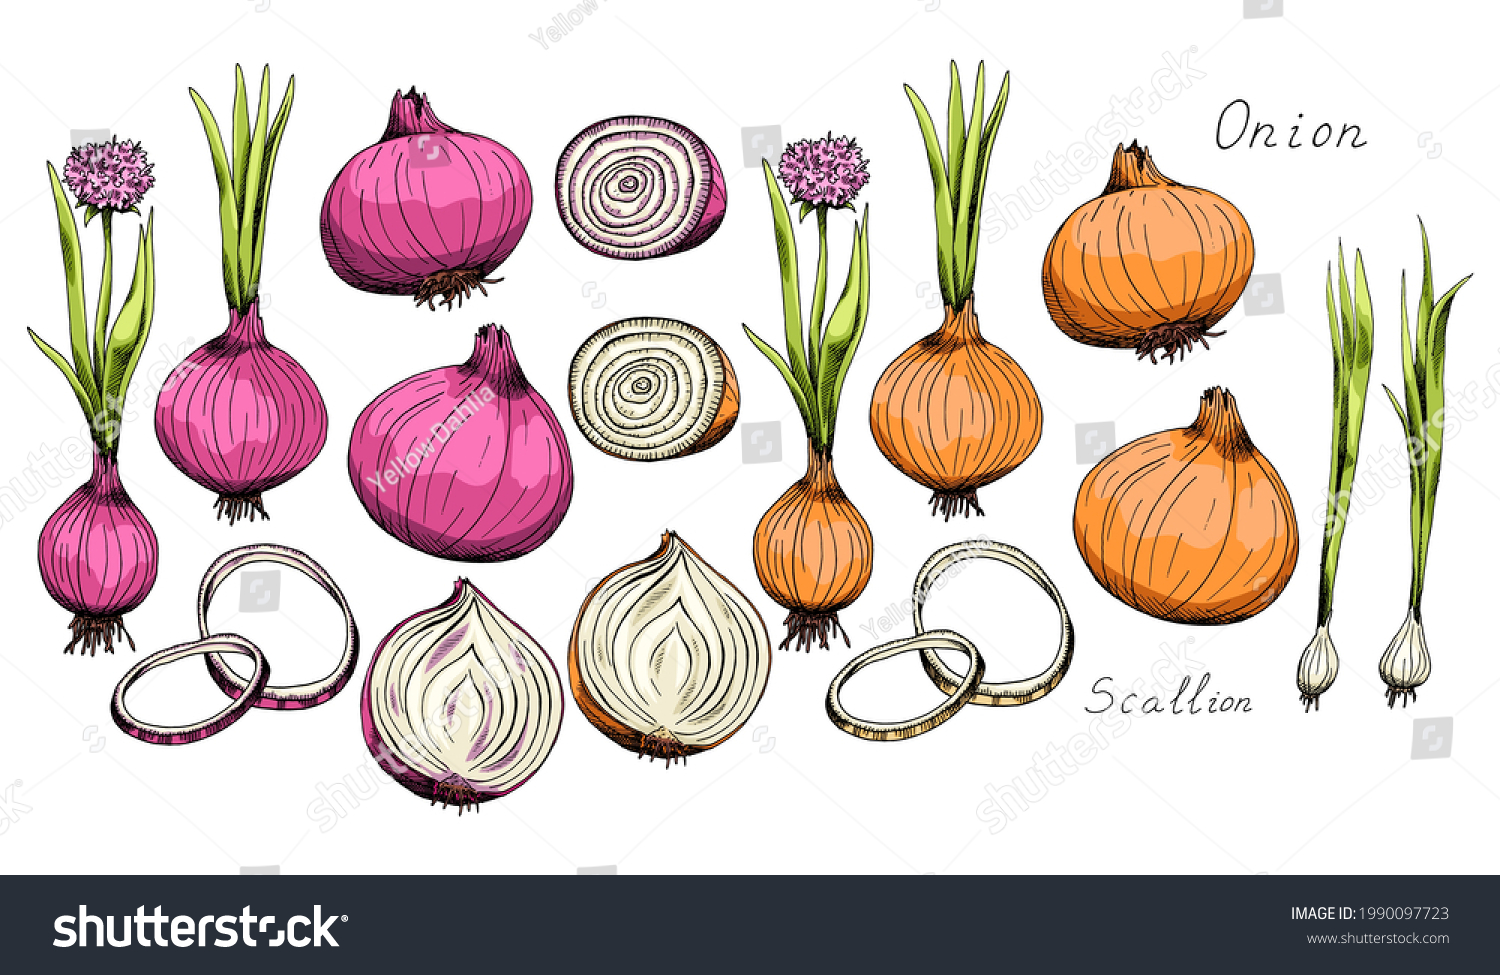 Onion. Whole, sliced vegetable. Rings. Sprigs. Flowering plant. Green onions. Scallion. Ink botanical vintage illustration. Isolated clipart set on white background. Hand-drawn sketch. #1990097723